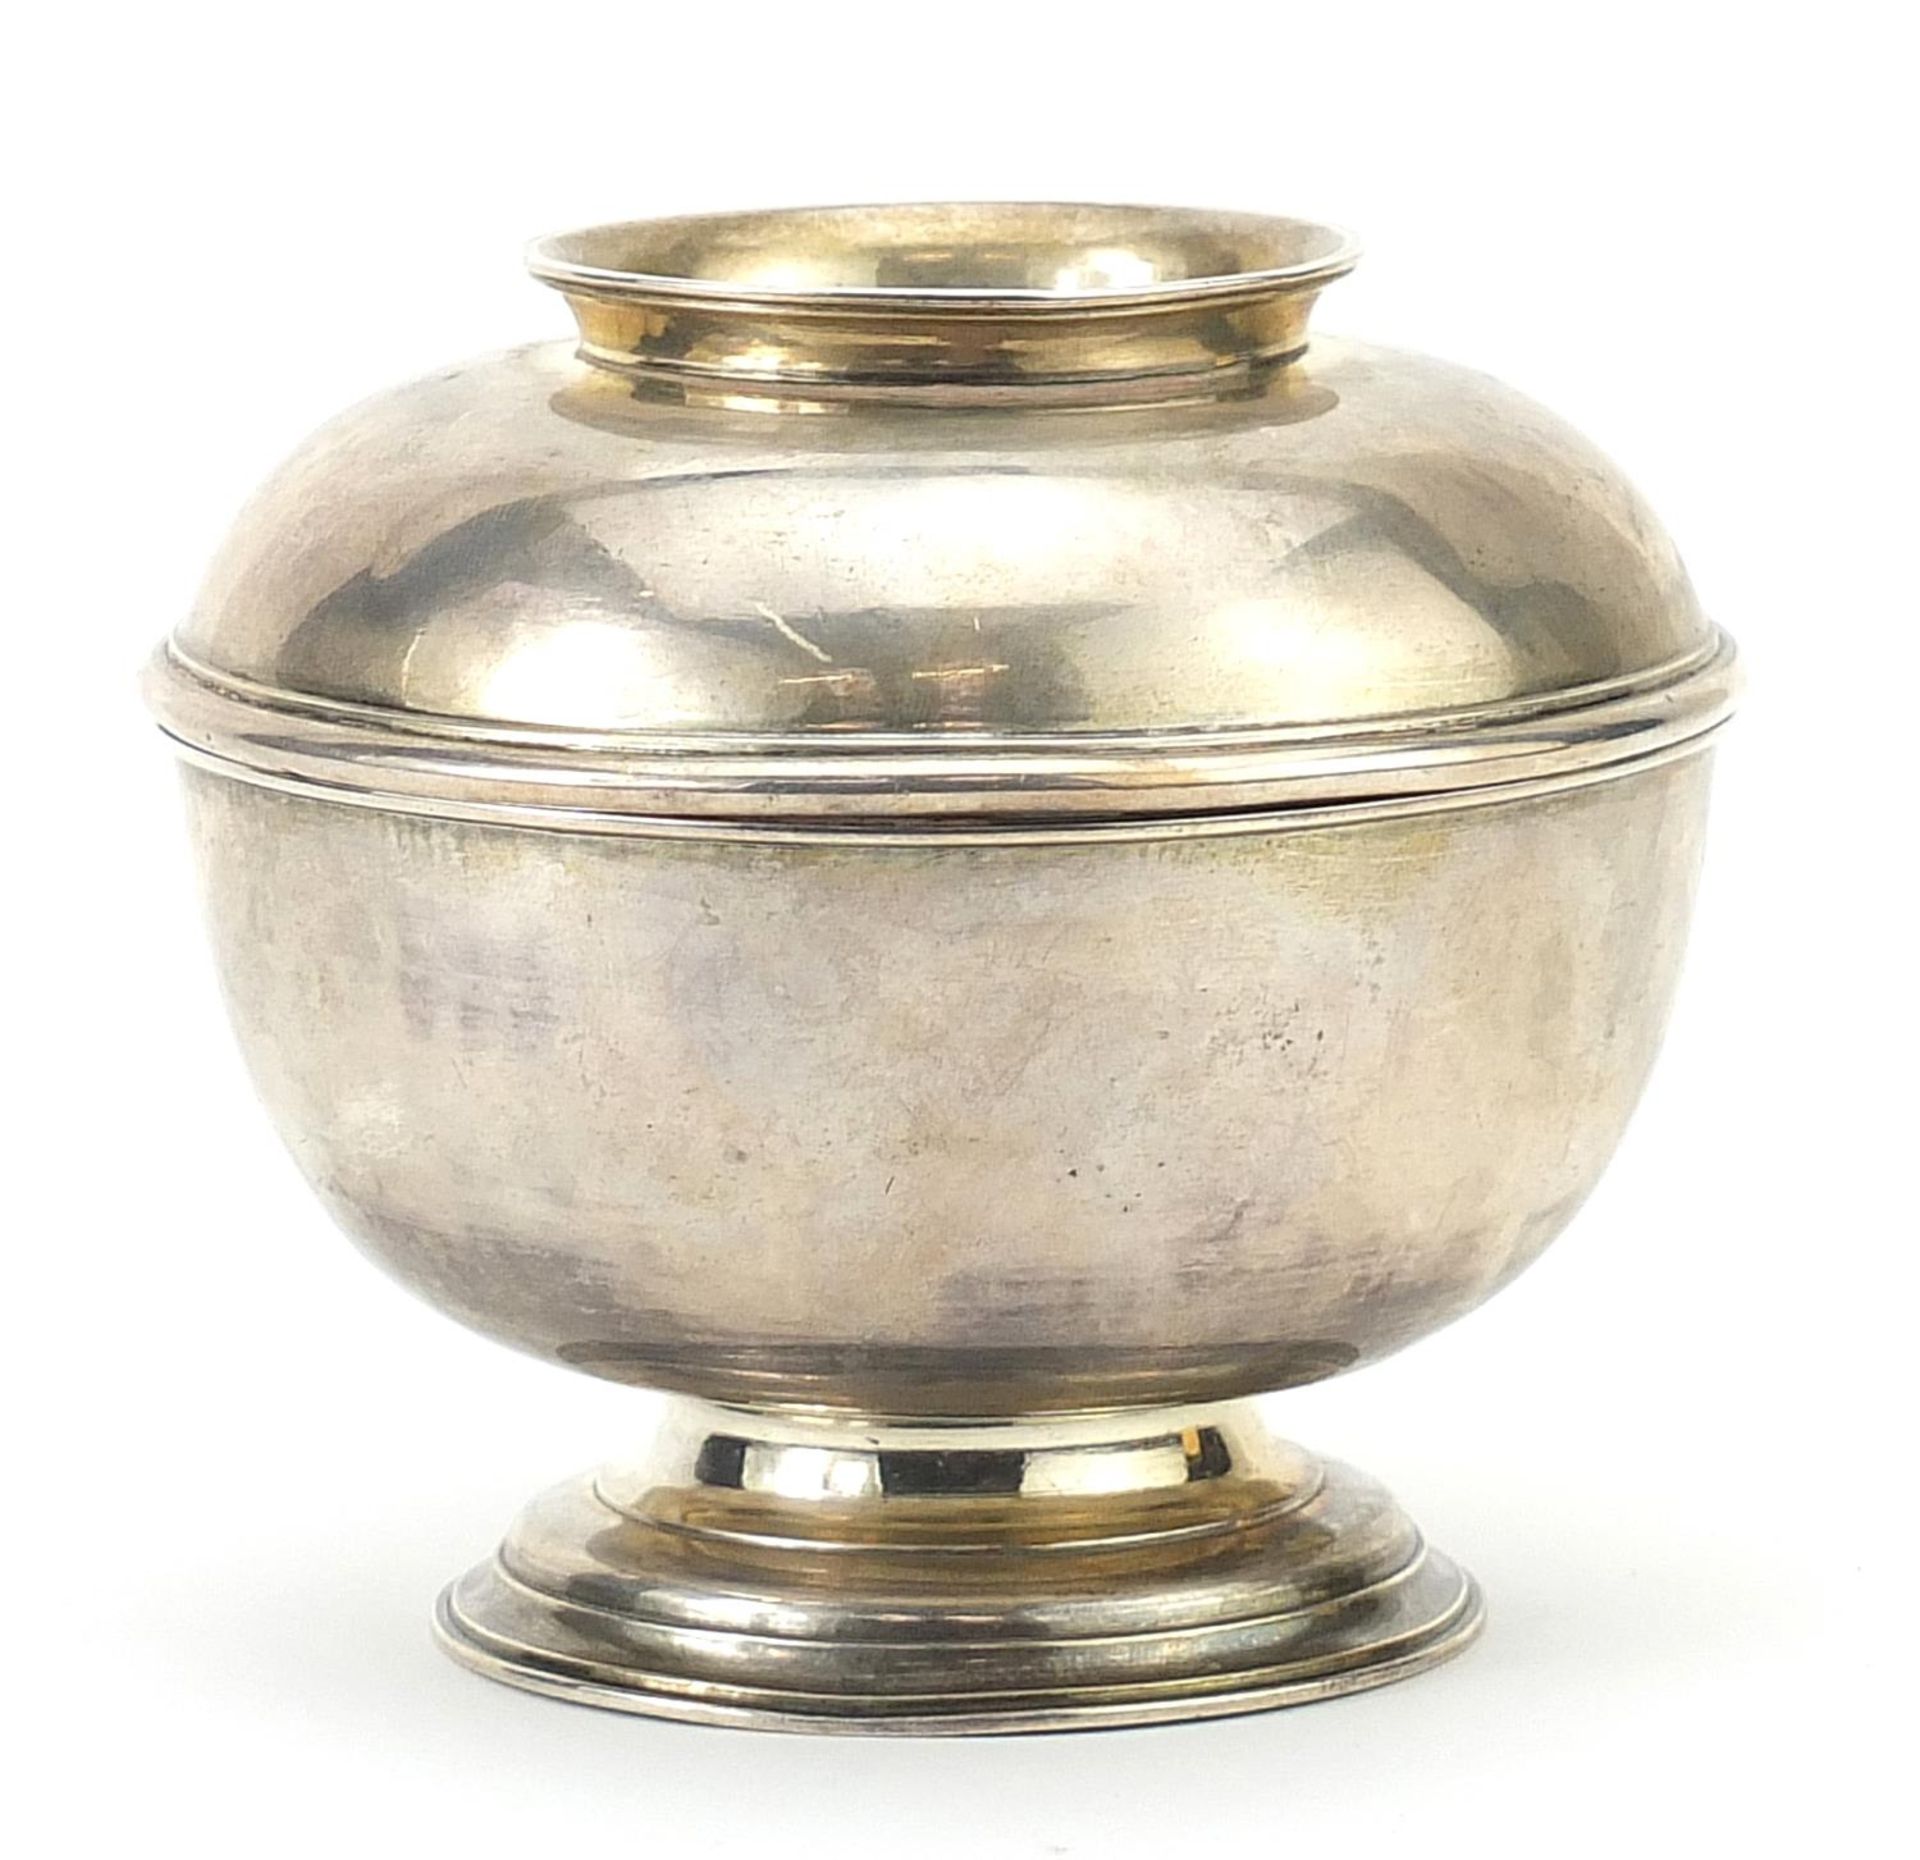 Richard Gurney & Thomas Cook, George II silver footed bowl and cover engraved with a crest, London - Image 2 of 4